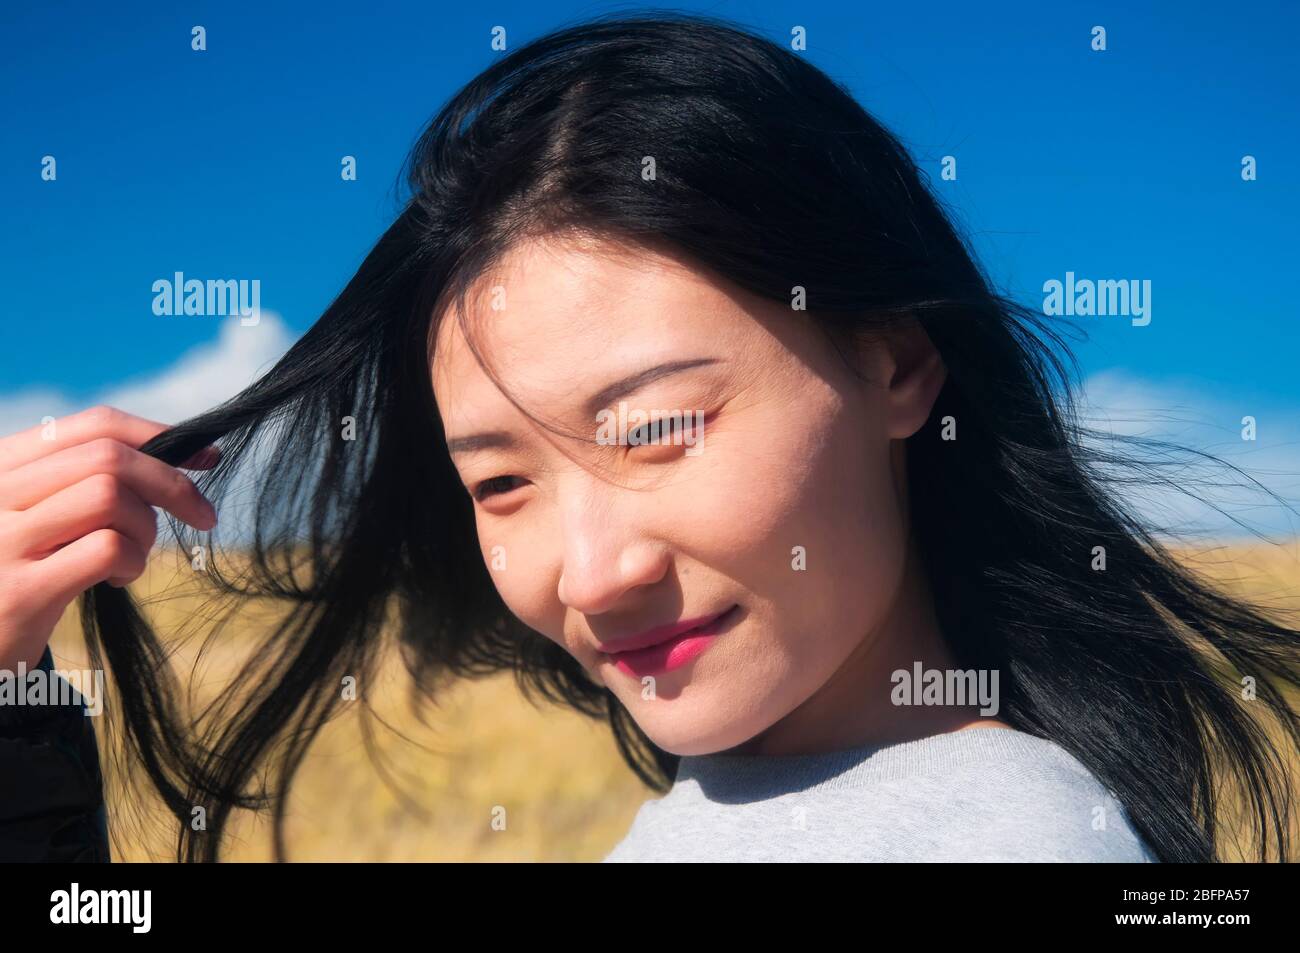 A chinese woman playing with her hair outside within the national seashore scenic area in Cape Cod Massachusetts on a sunny blue sky day. Stock Photo